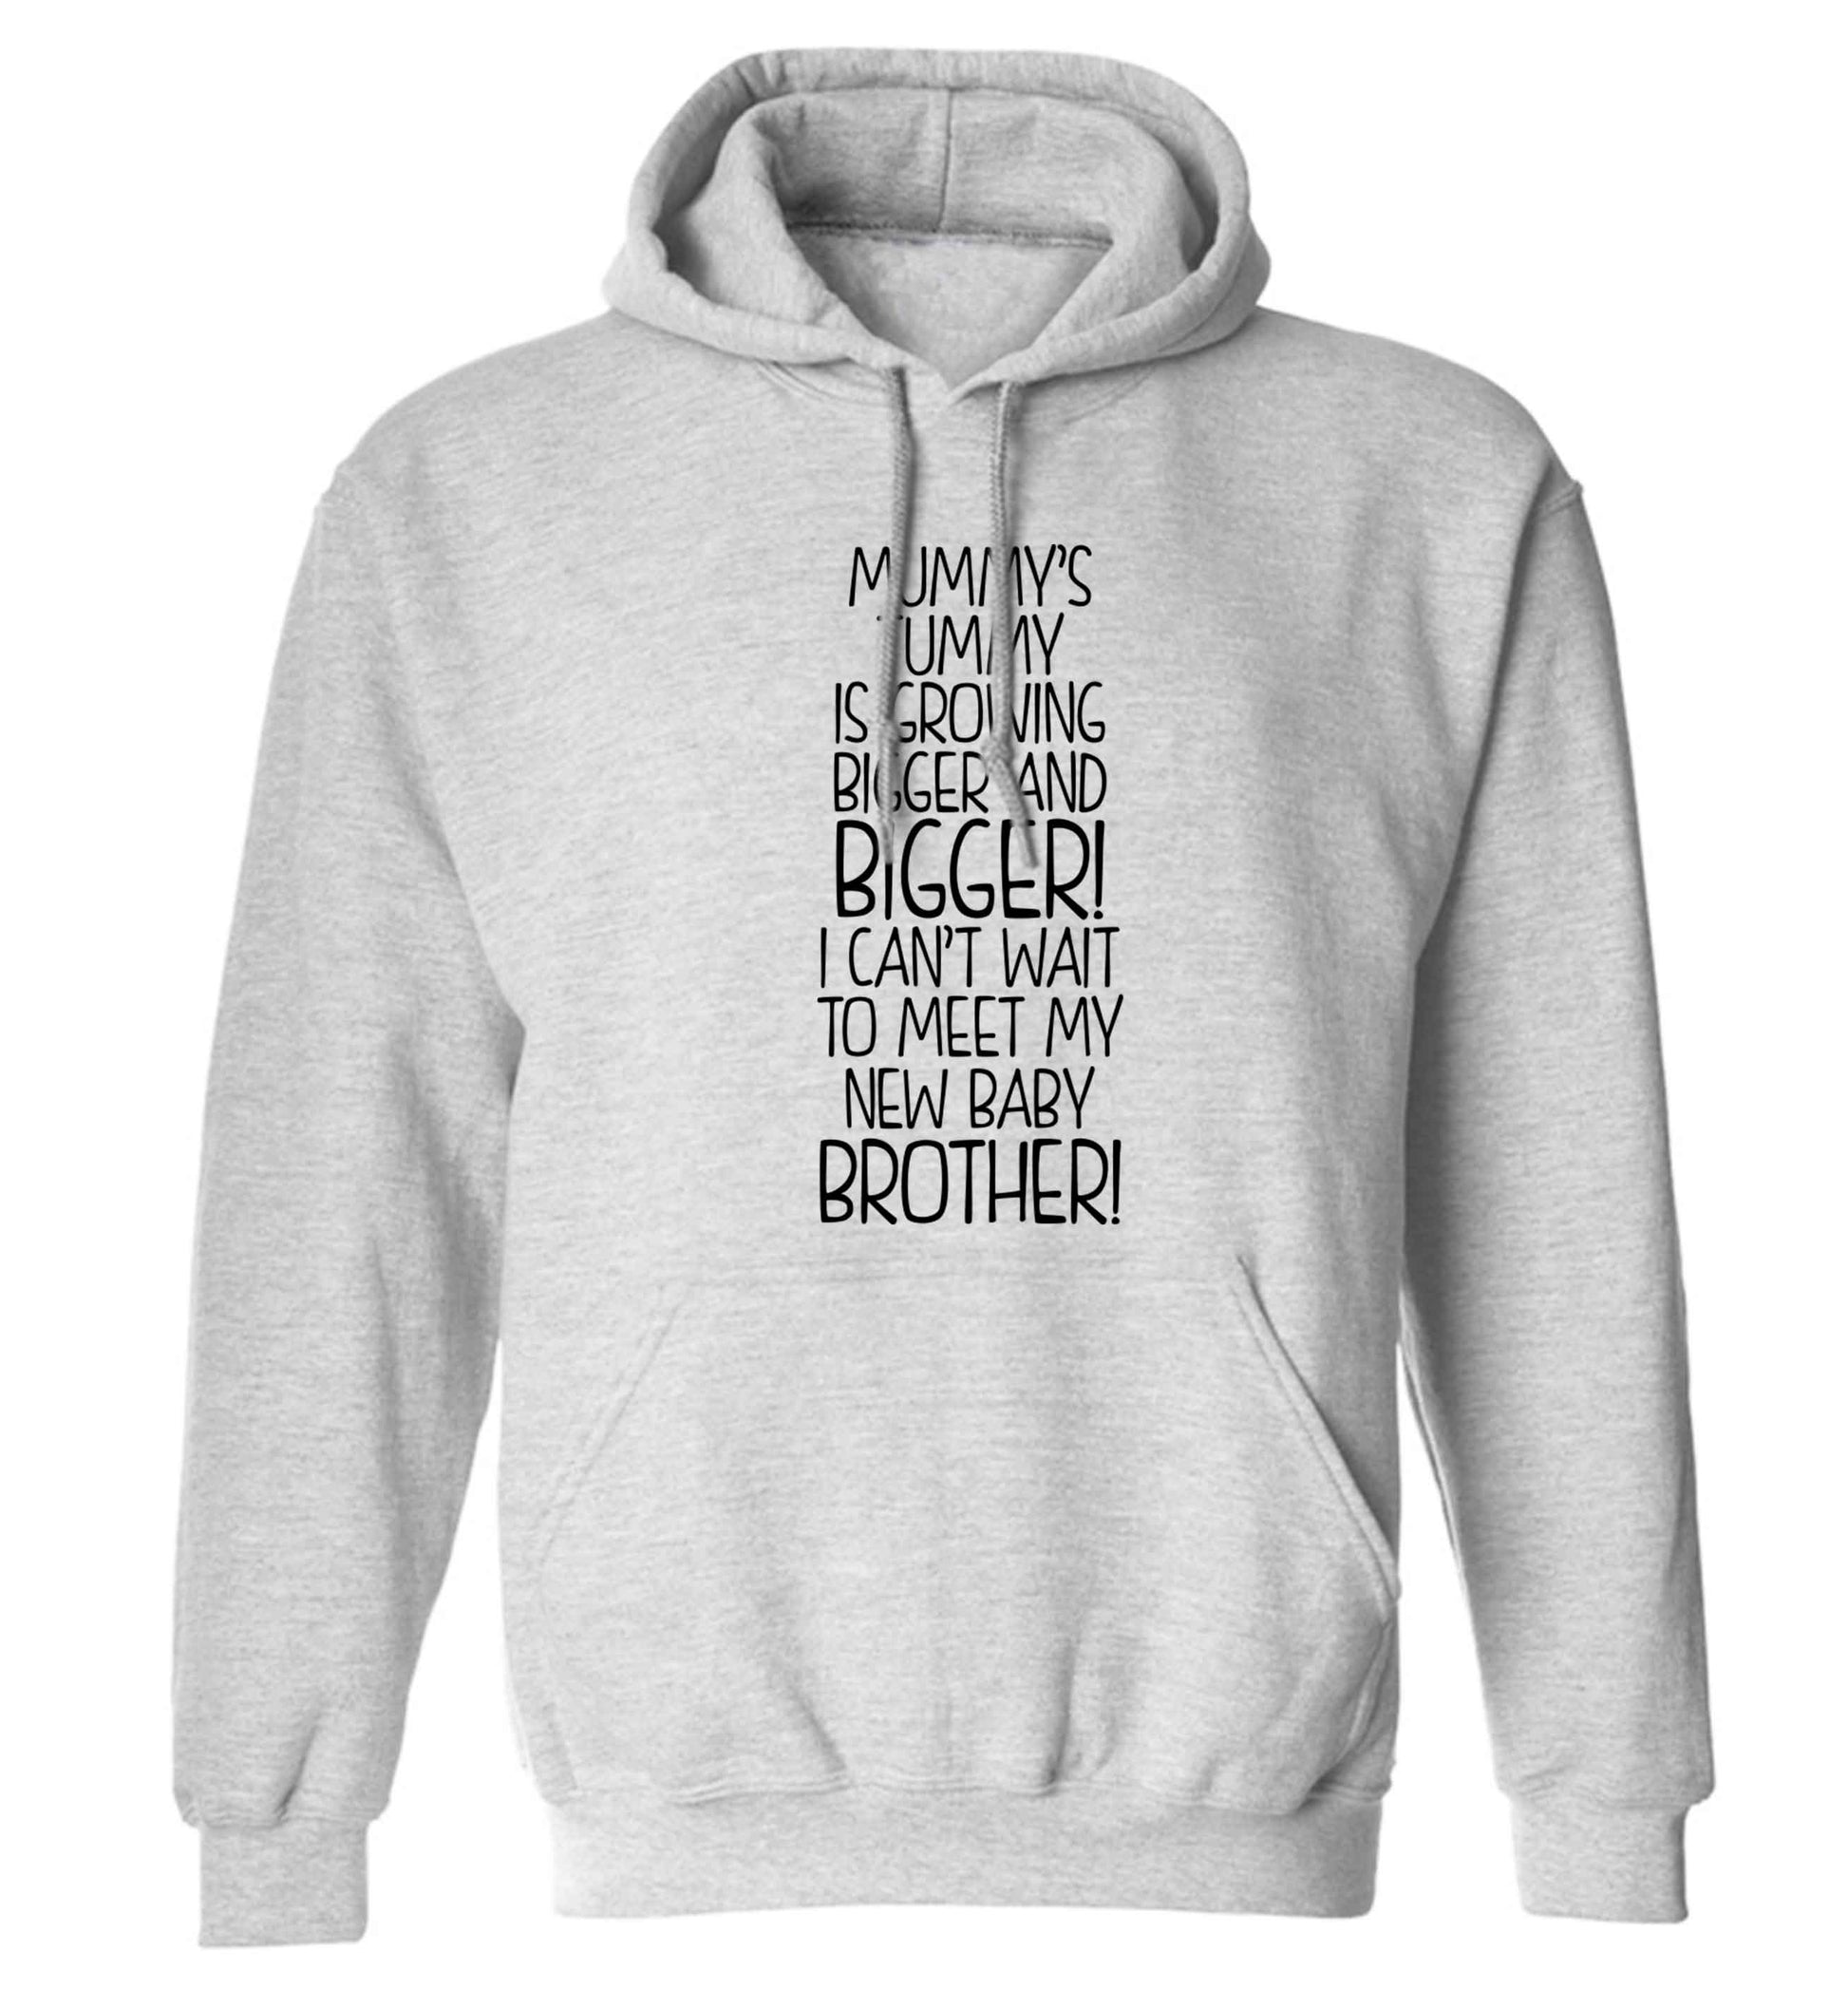 Mummy's tummy is growing bigger and bigger I can't wait to meet my new baby brother! adults unisex grey hoodie 2XL